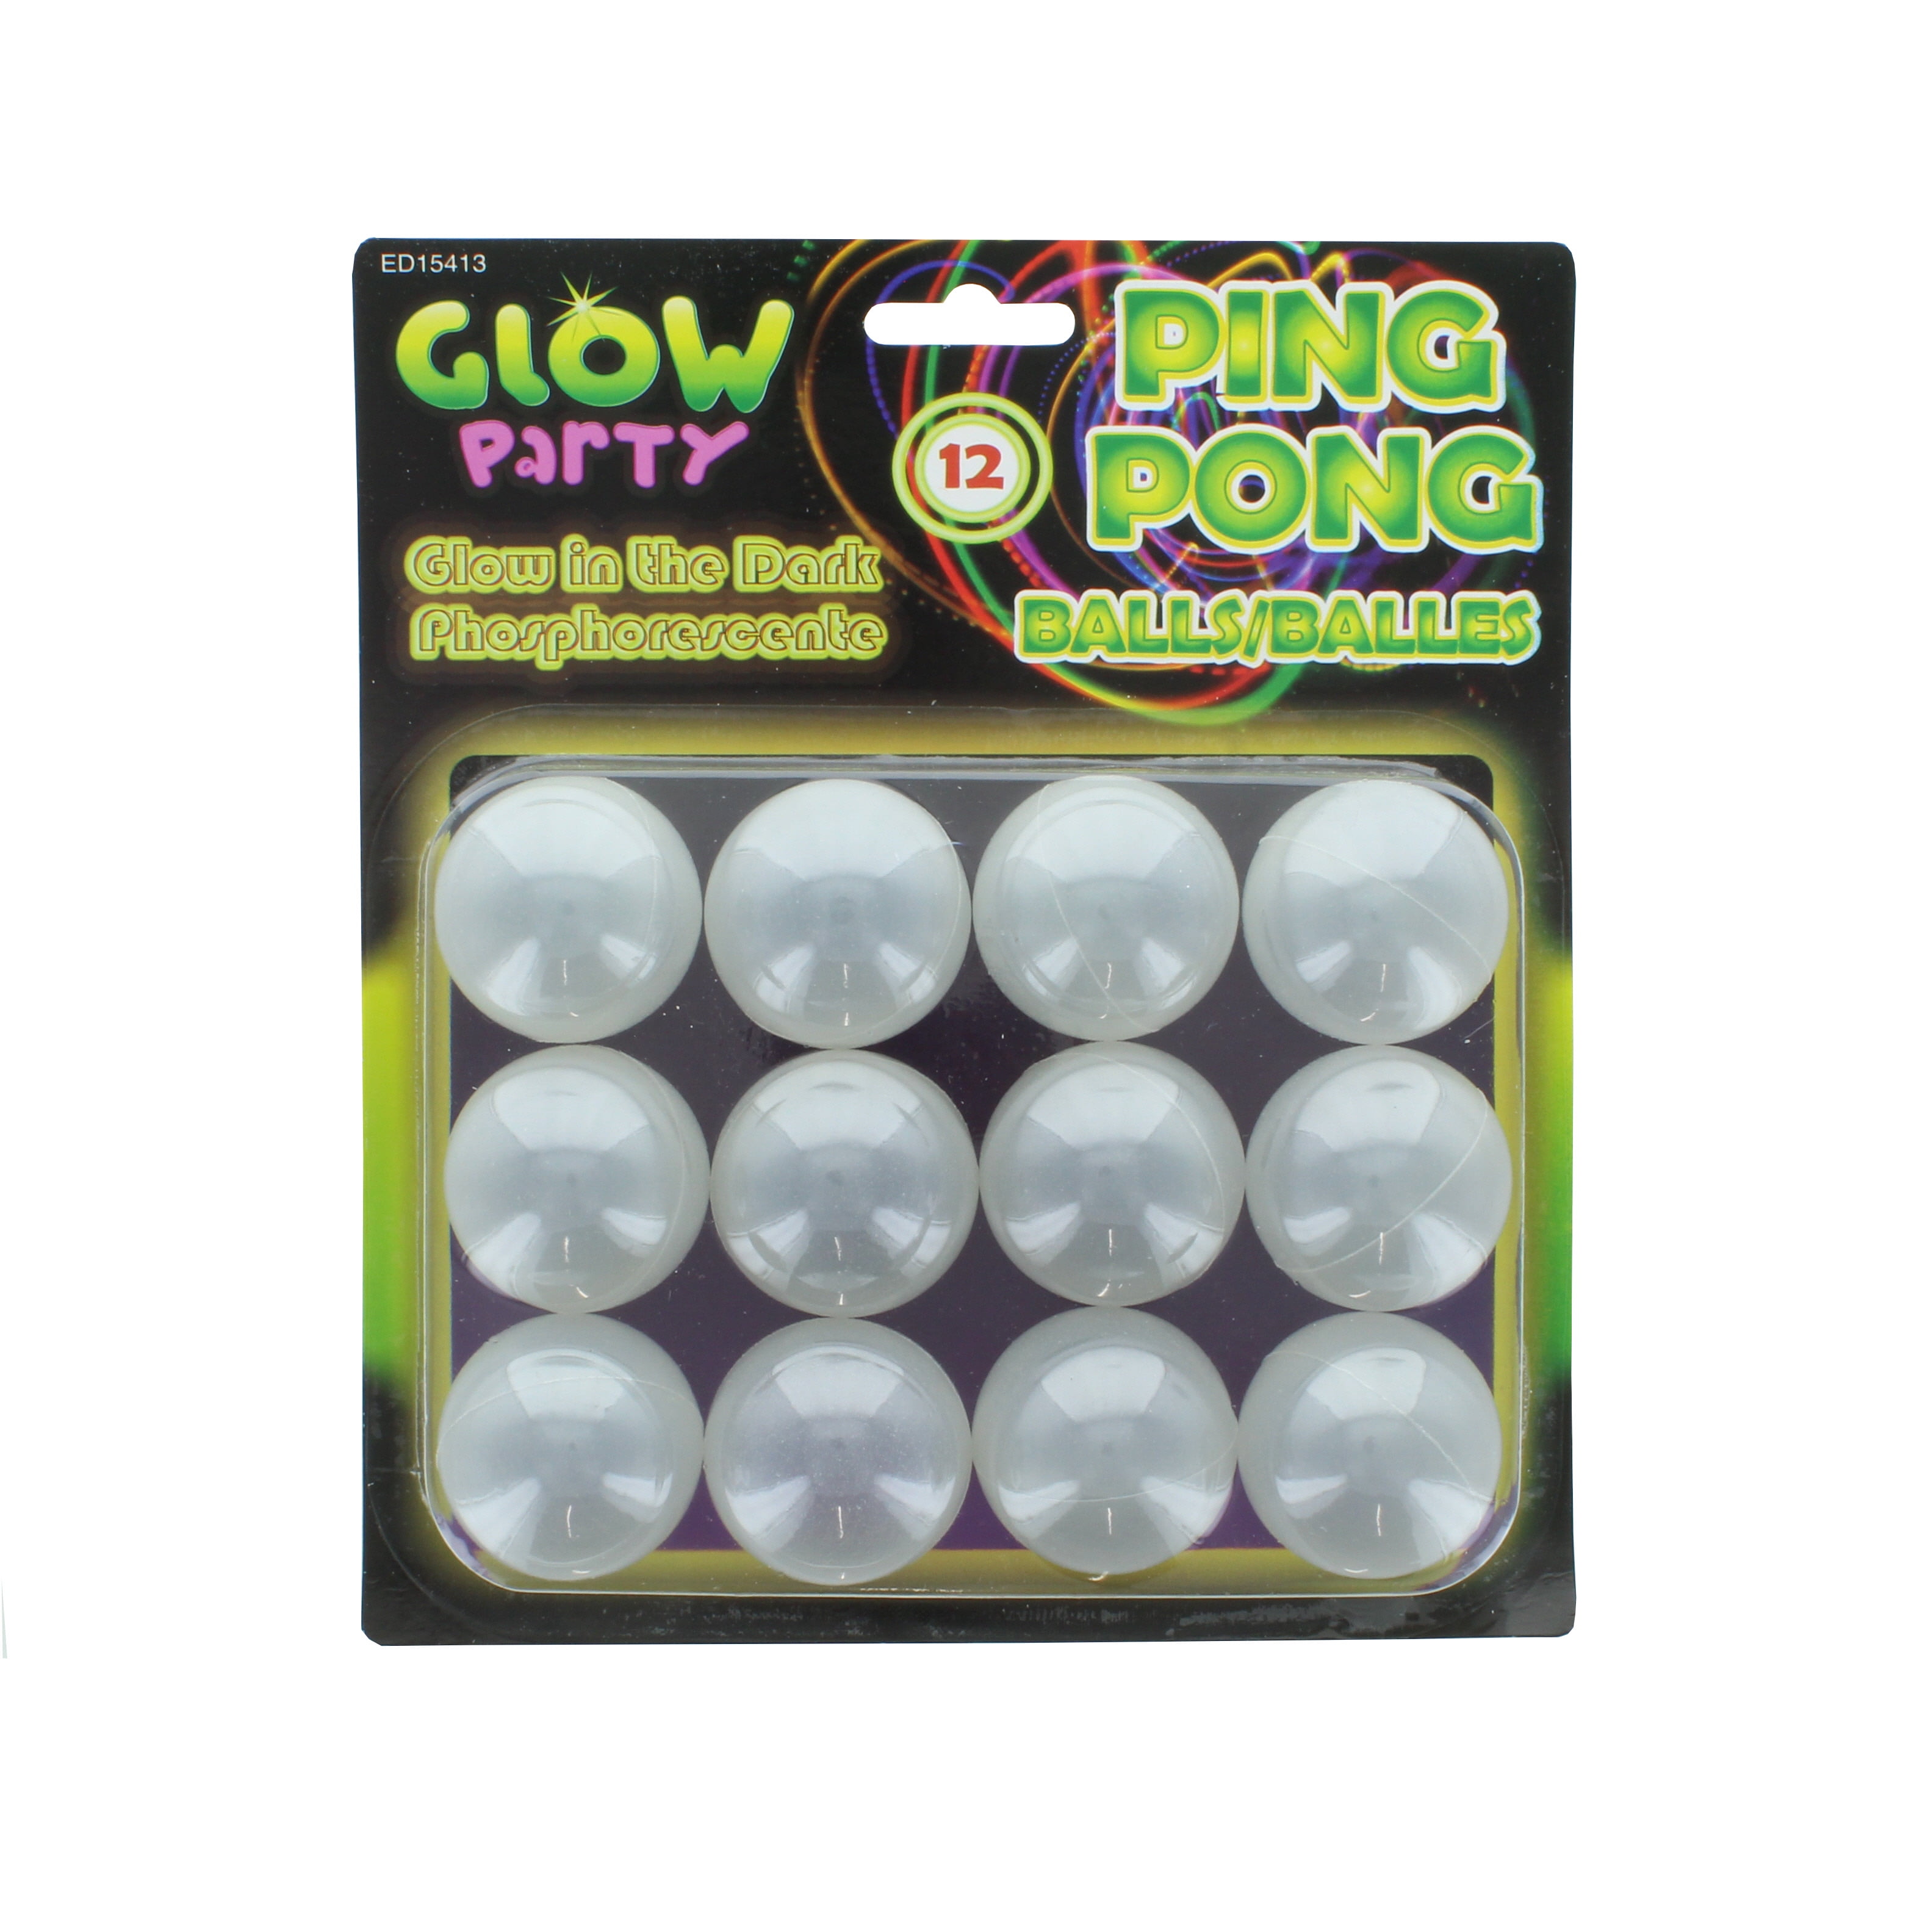 50 Beer Ping Pong Balls Glow In The Dark Pingpong Ball White Bulk Lot For Games 